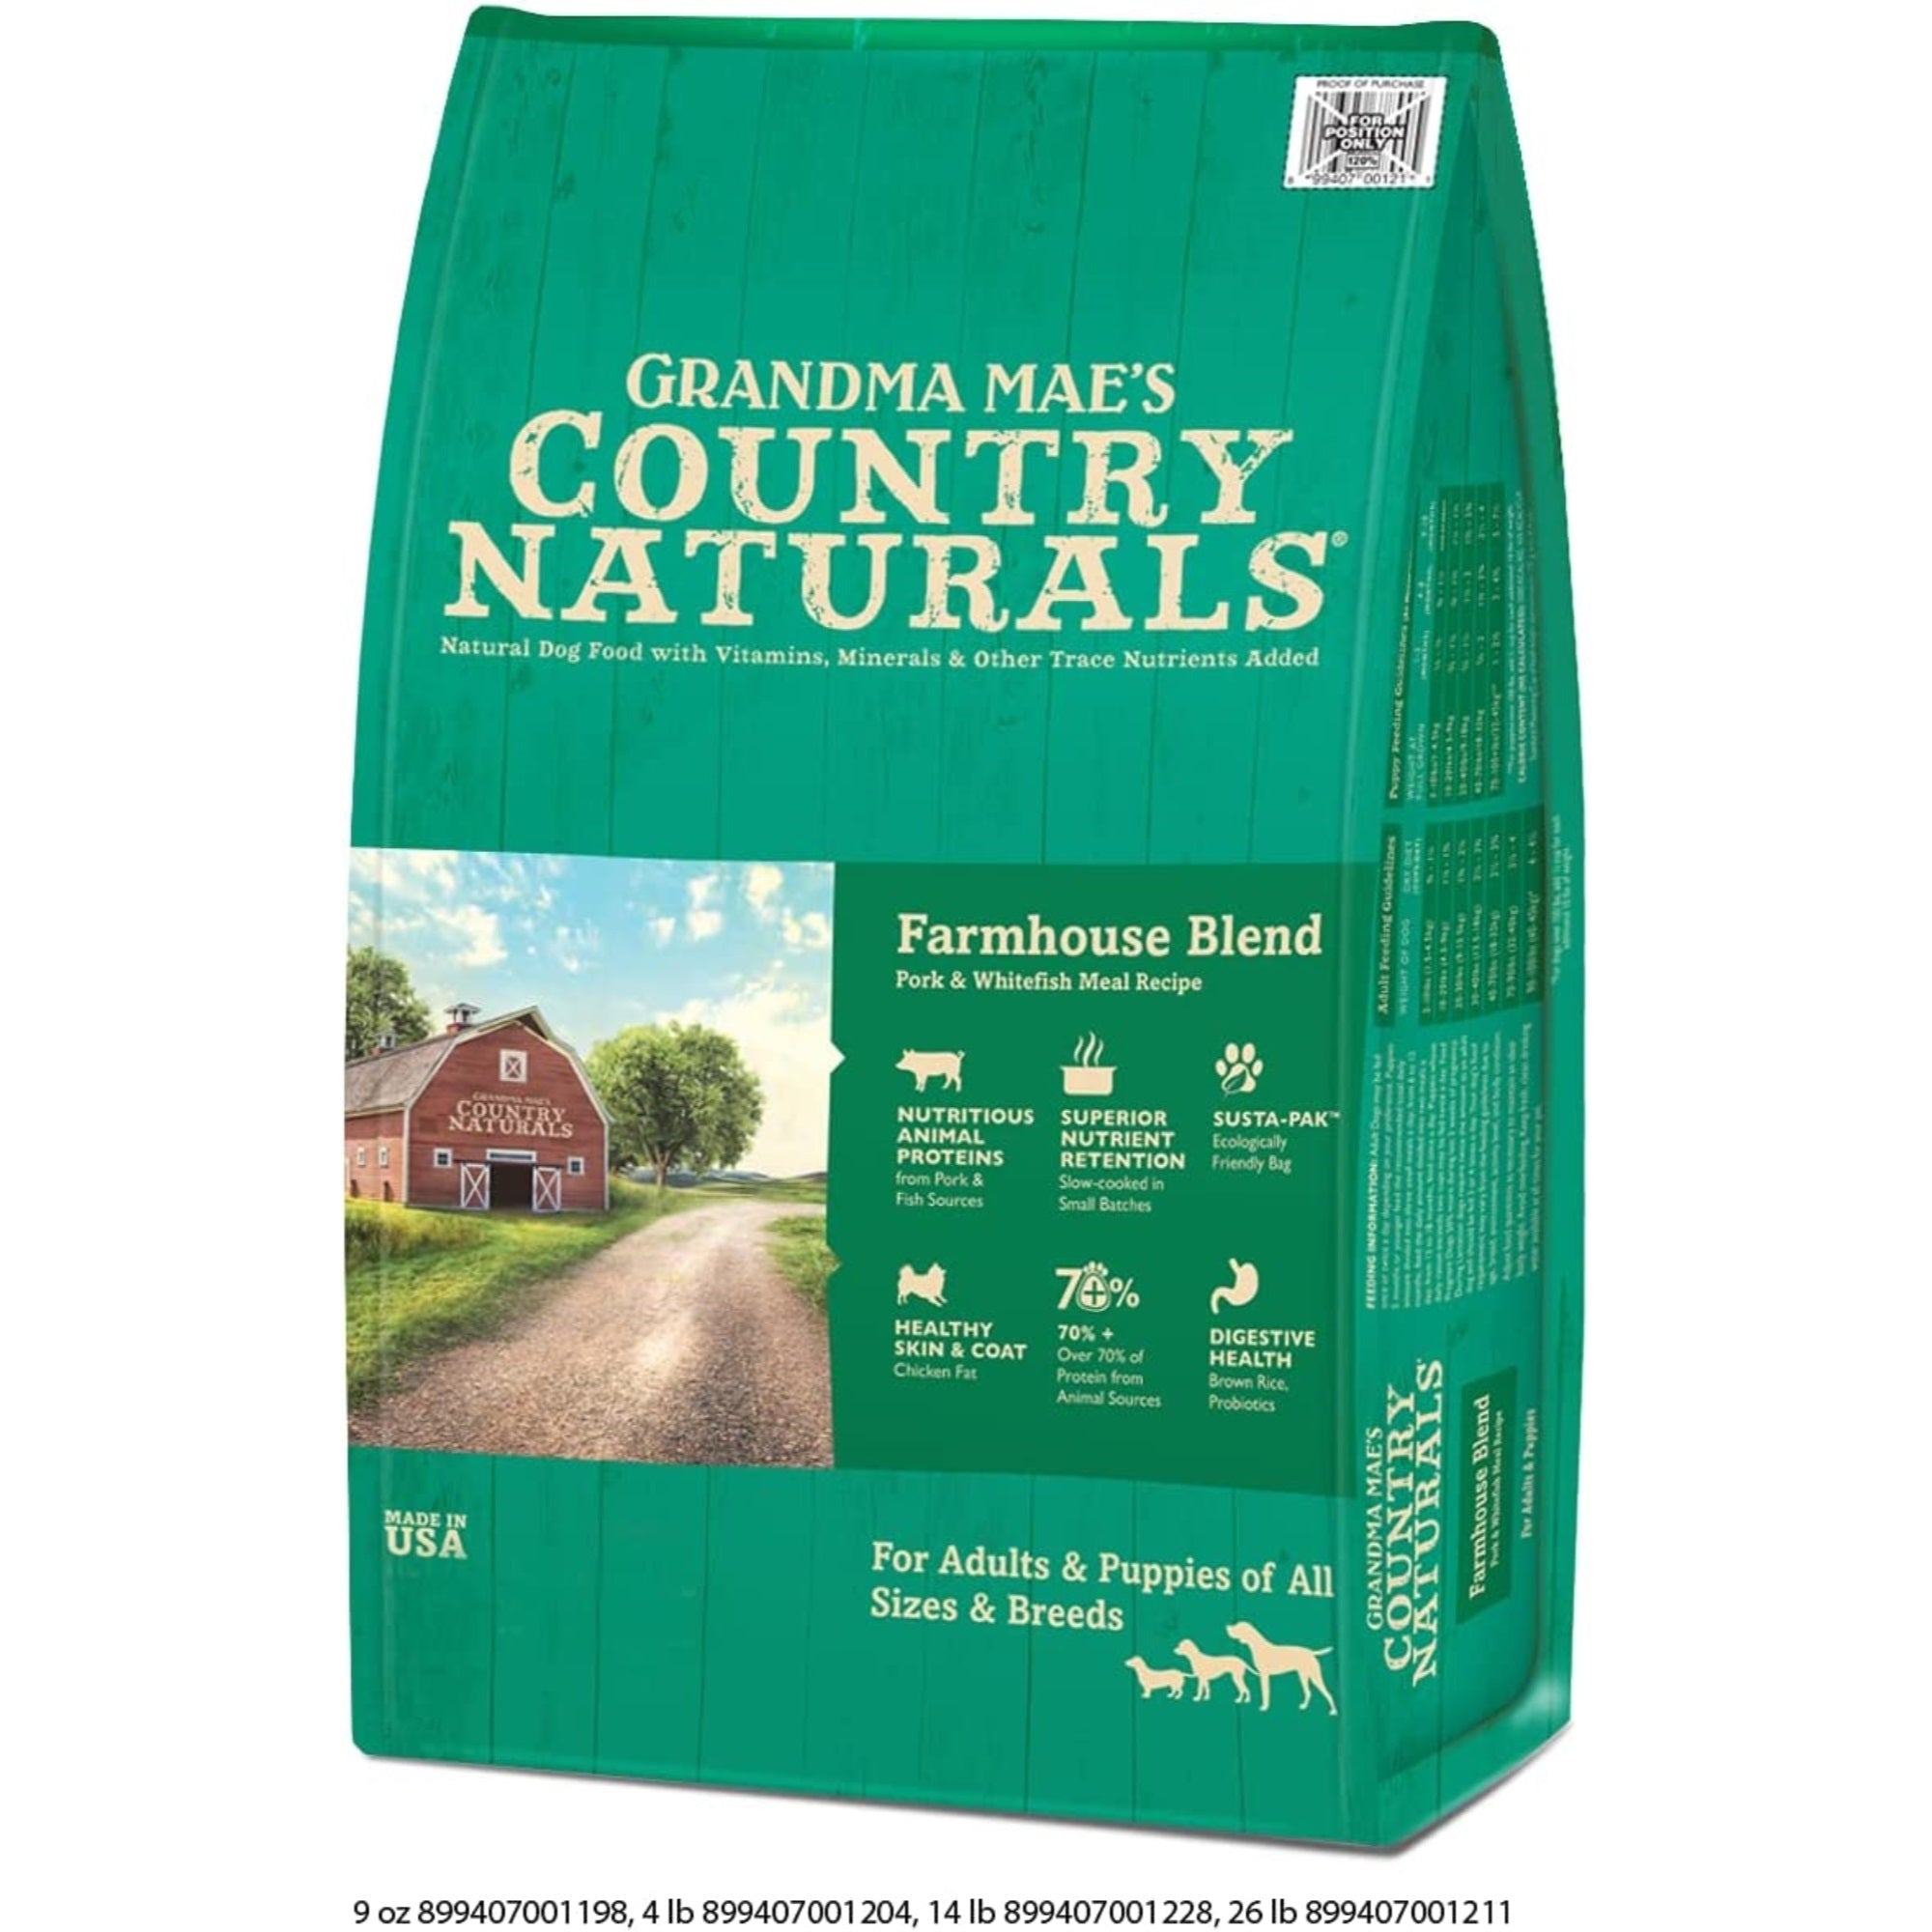 Grandma Mae's Country Naturals Farmhouse Blend Pork & Fish Entrée with Meat & Brown Rice, 14 LB